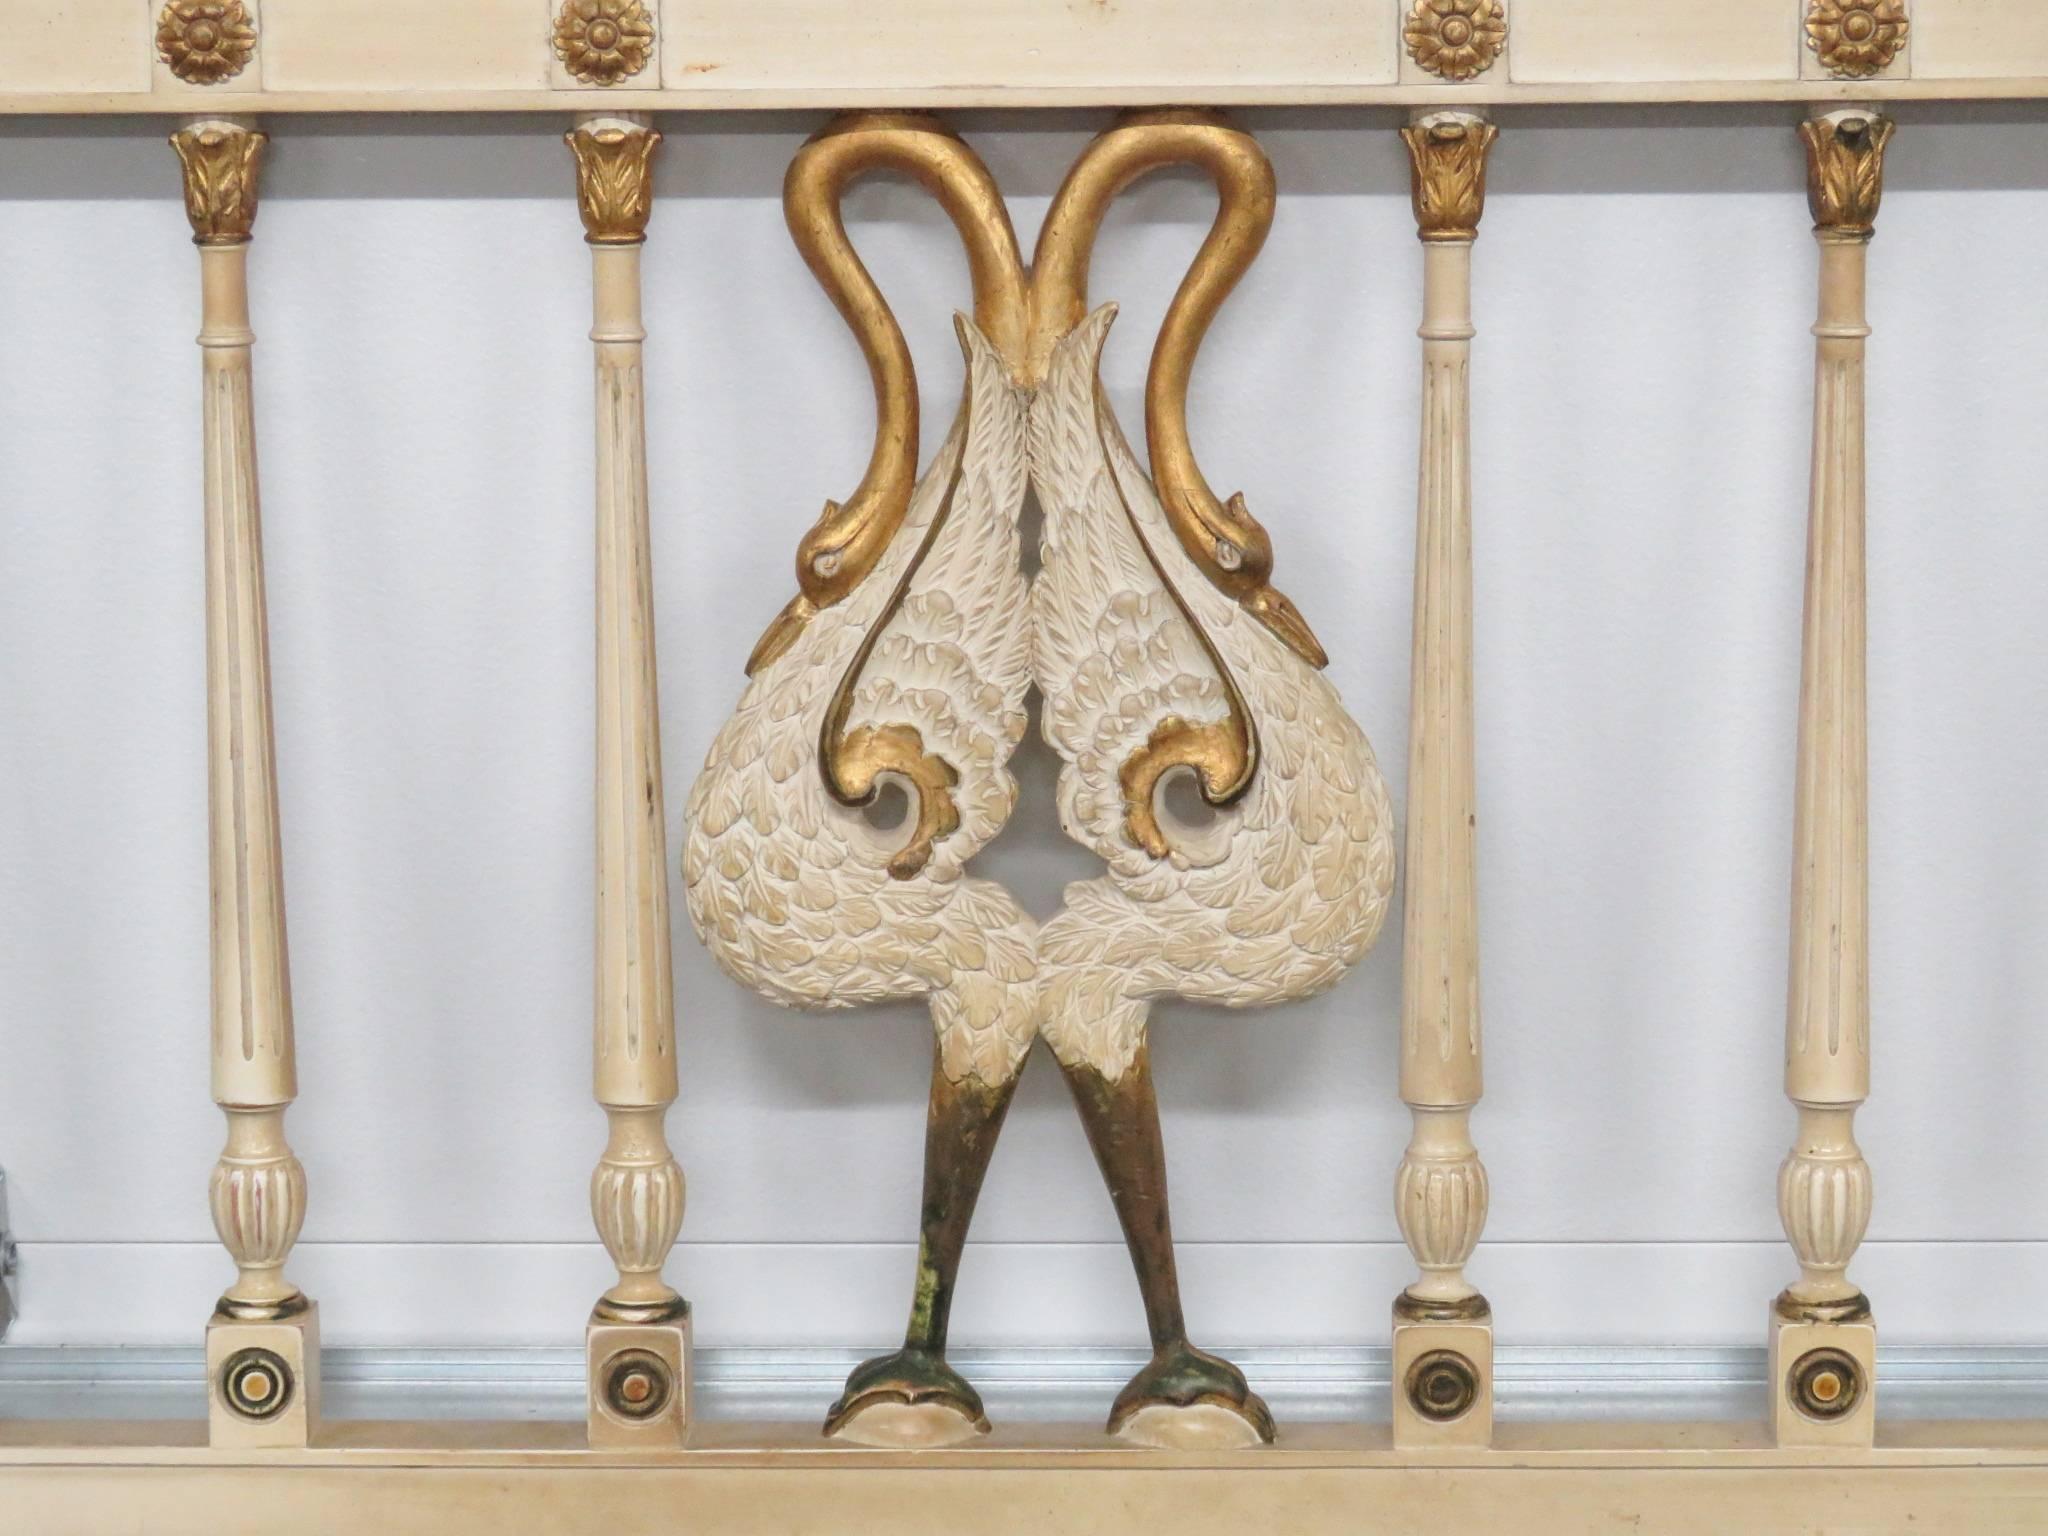 Headboard is cream painted with gilt highlights and swans.